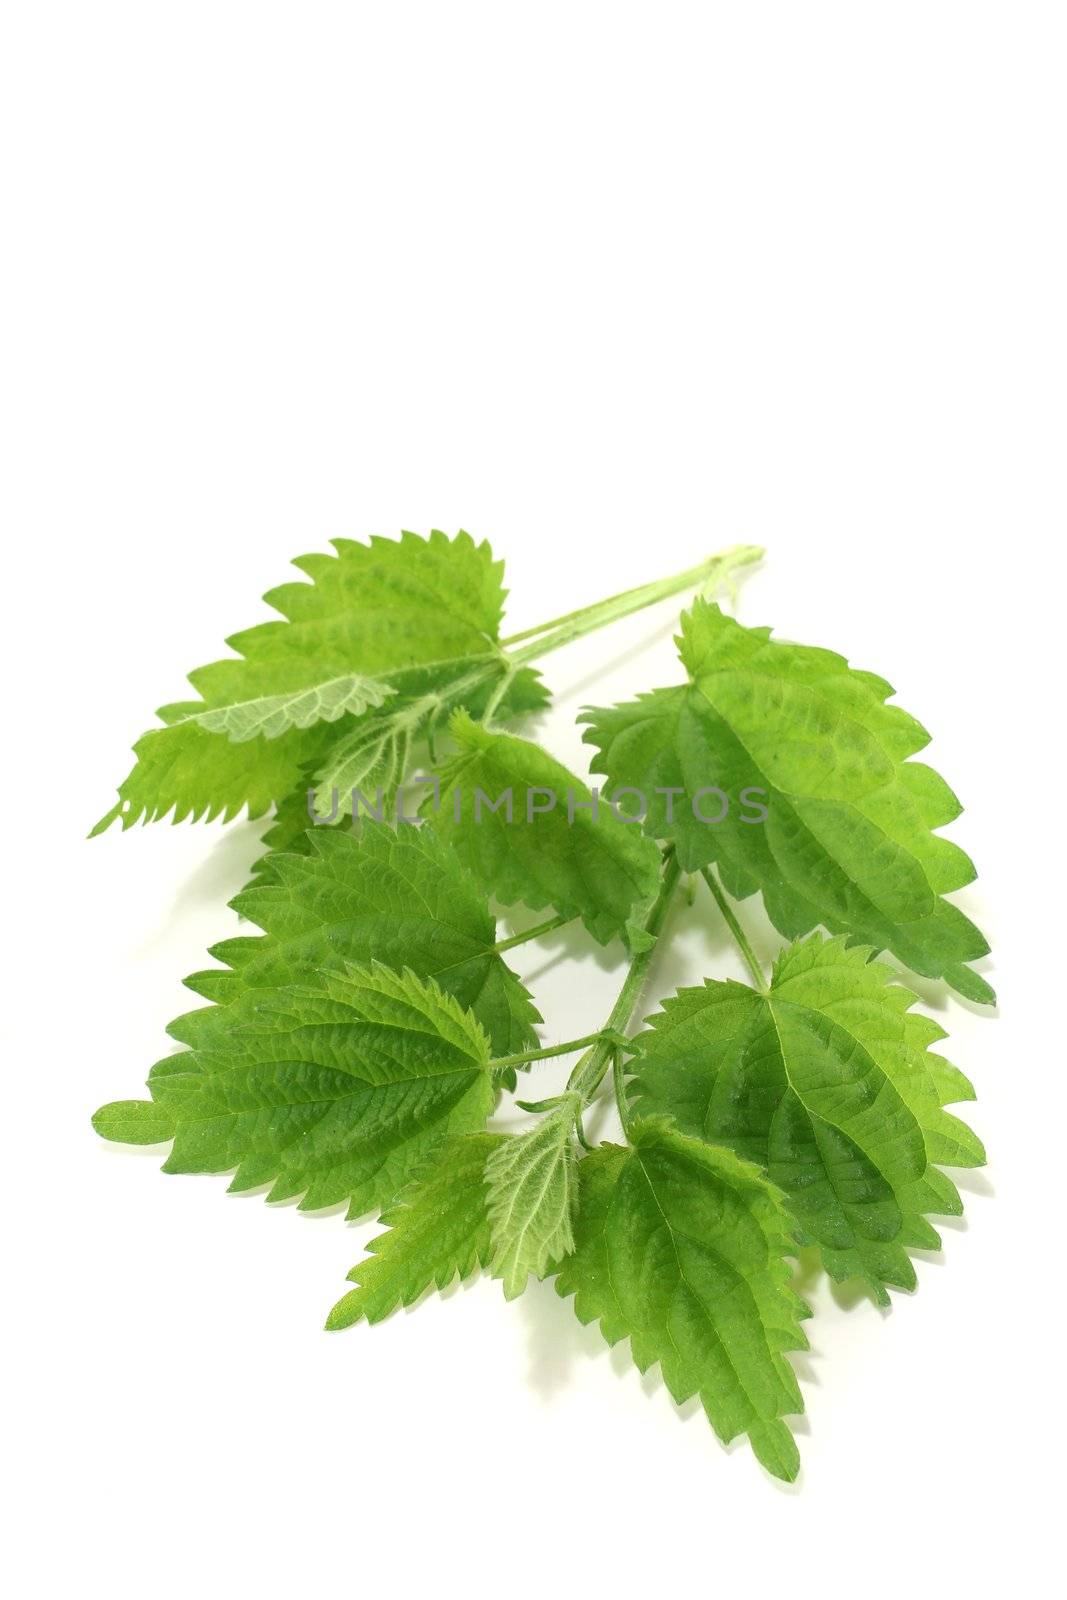 two branches of fresh nettles on a light background